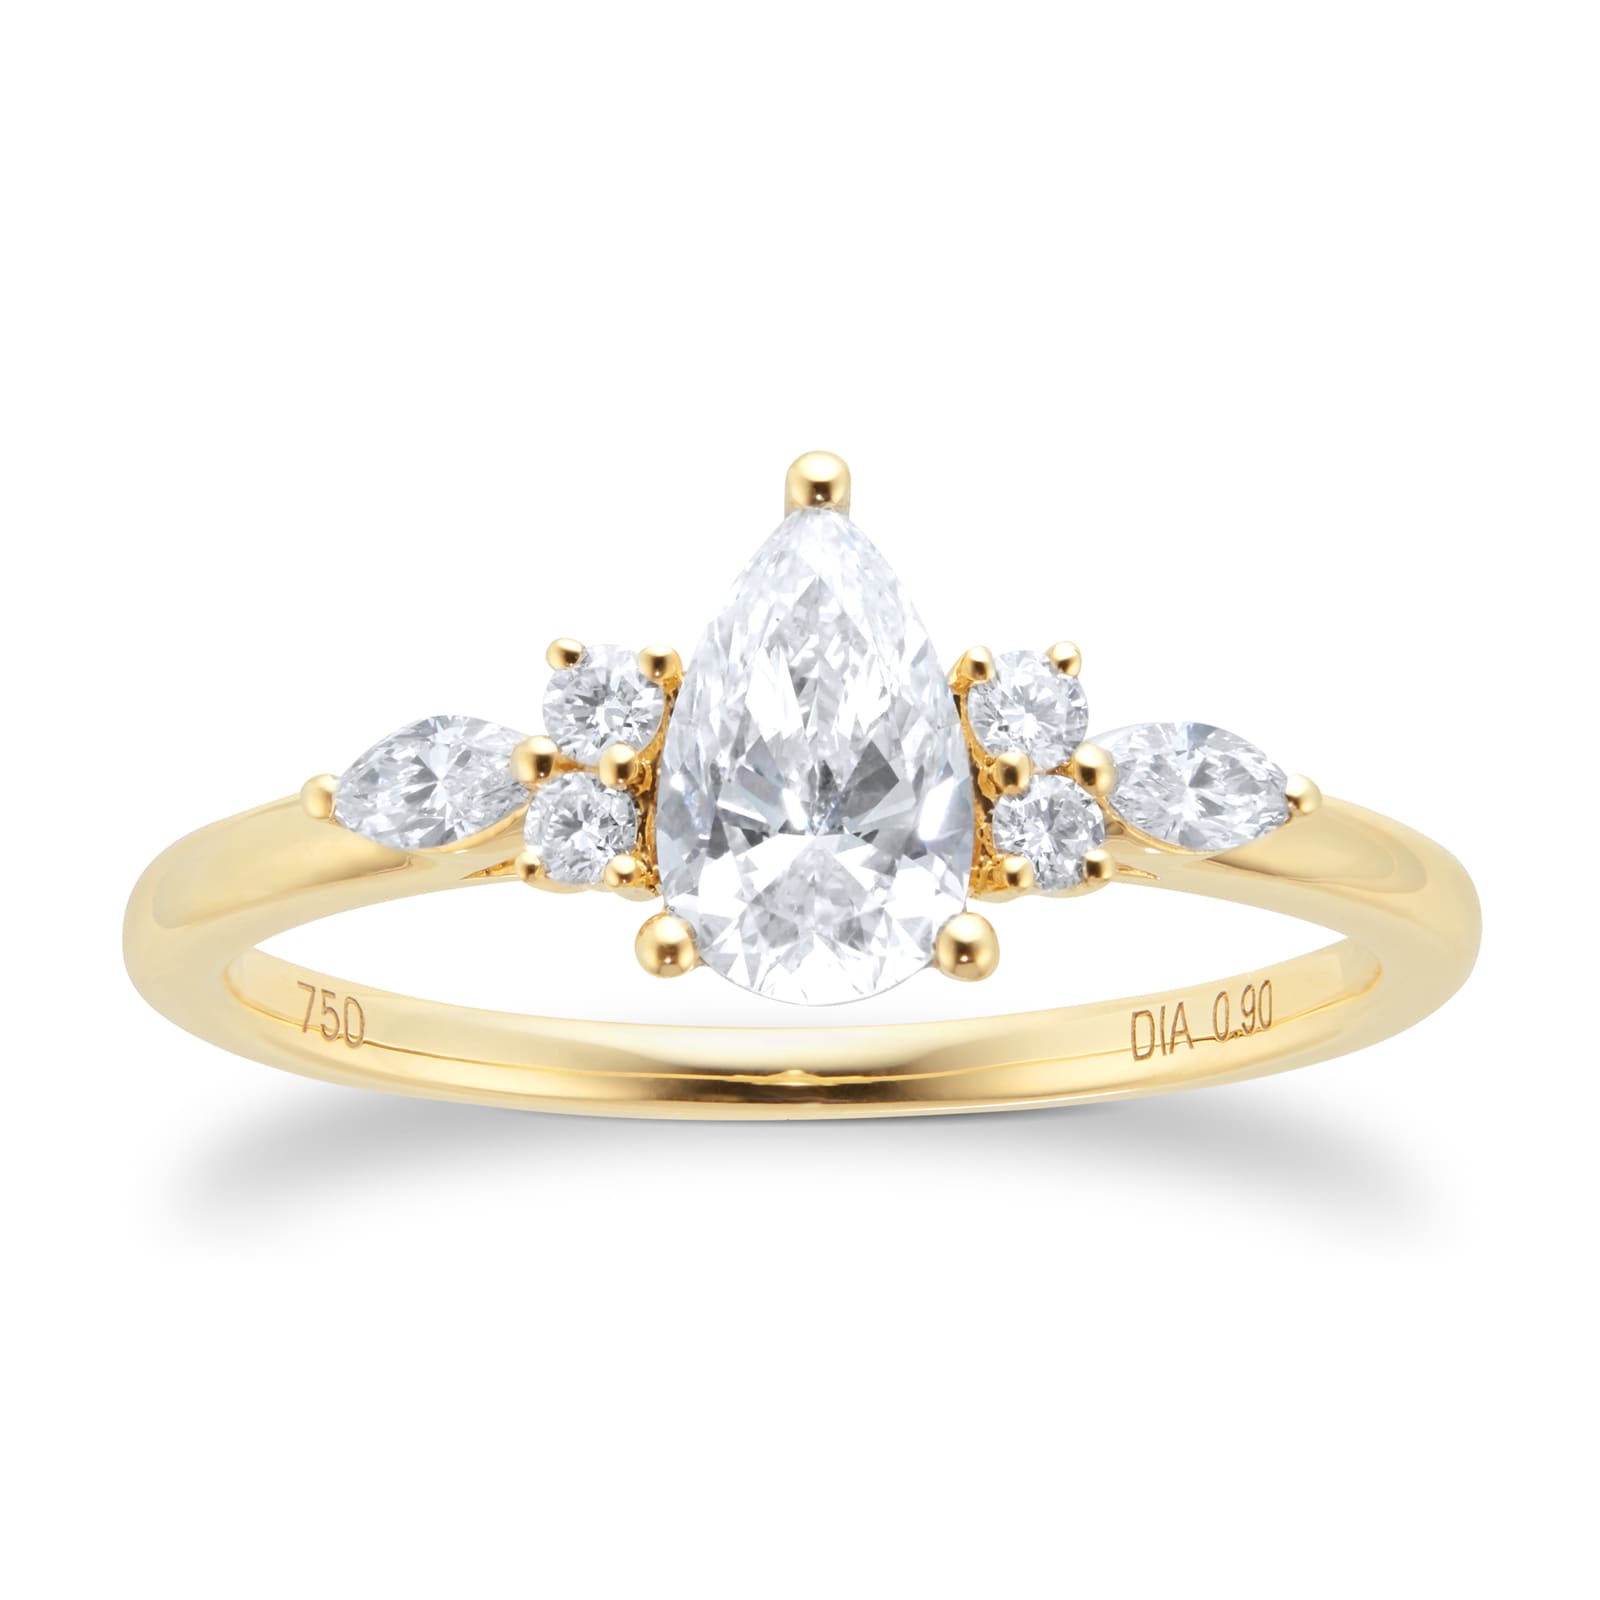 18ct Yellow Gold 0.90cttw Diamond Pear Scatter Engagement Ring - Ring Size M